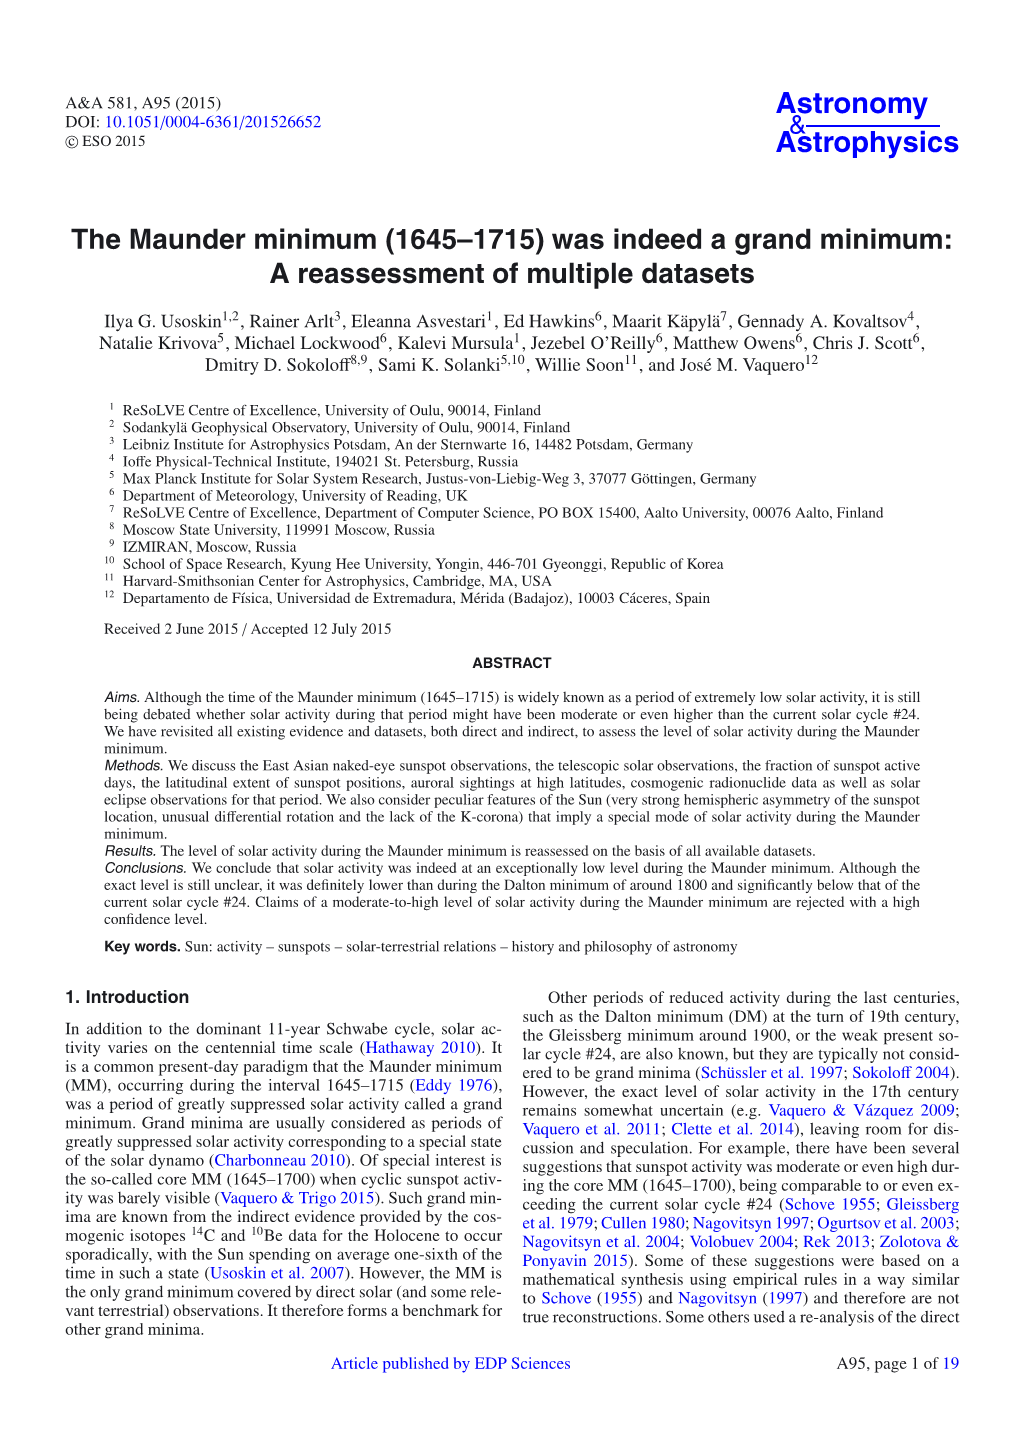 The Maunder Minimum (1645–1715) Was Indeed a Grand Minimum: a Reassessment of Multiple Datasets